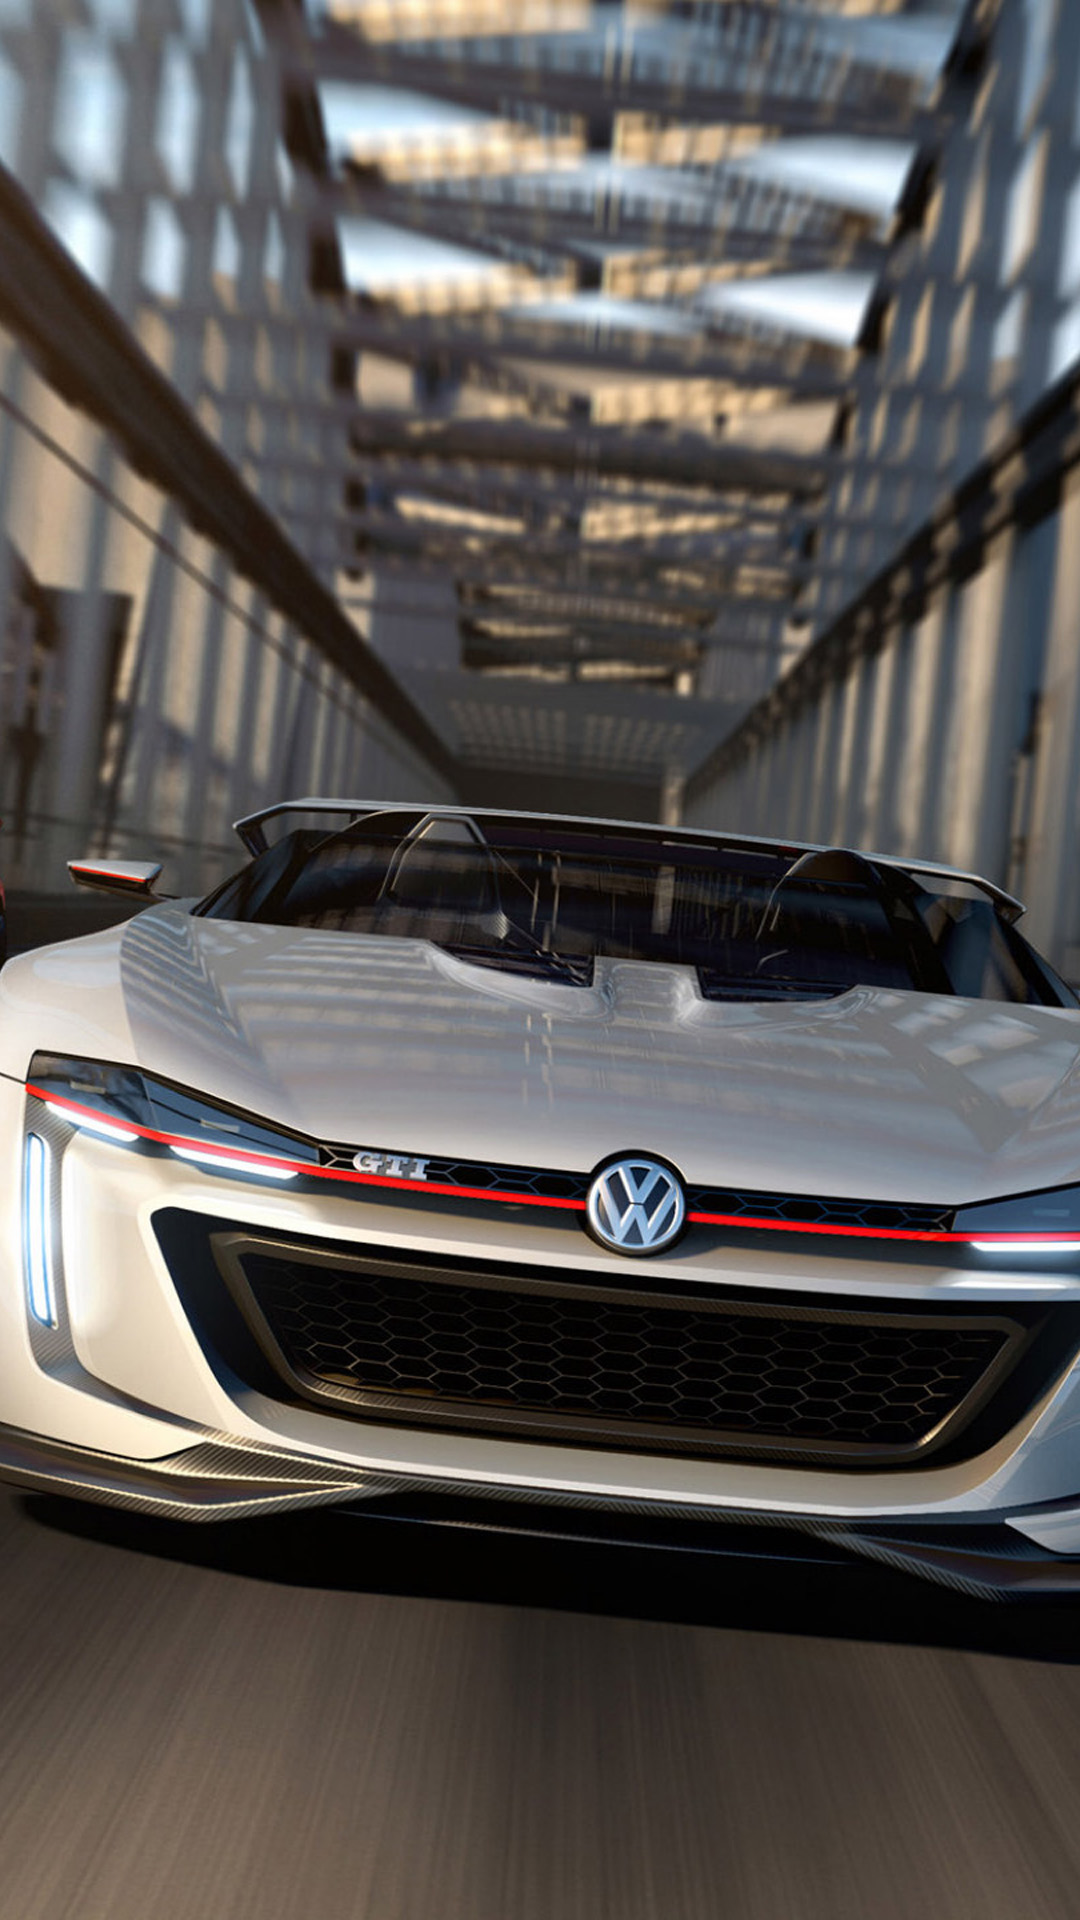 Volkswagen Gti Roadster White Android Wallpaper - Volkswagen Wallpaper For Iphone - HD Wallpaper 